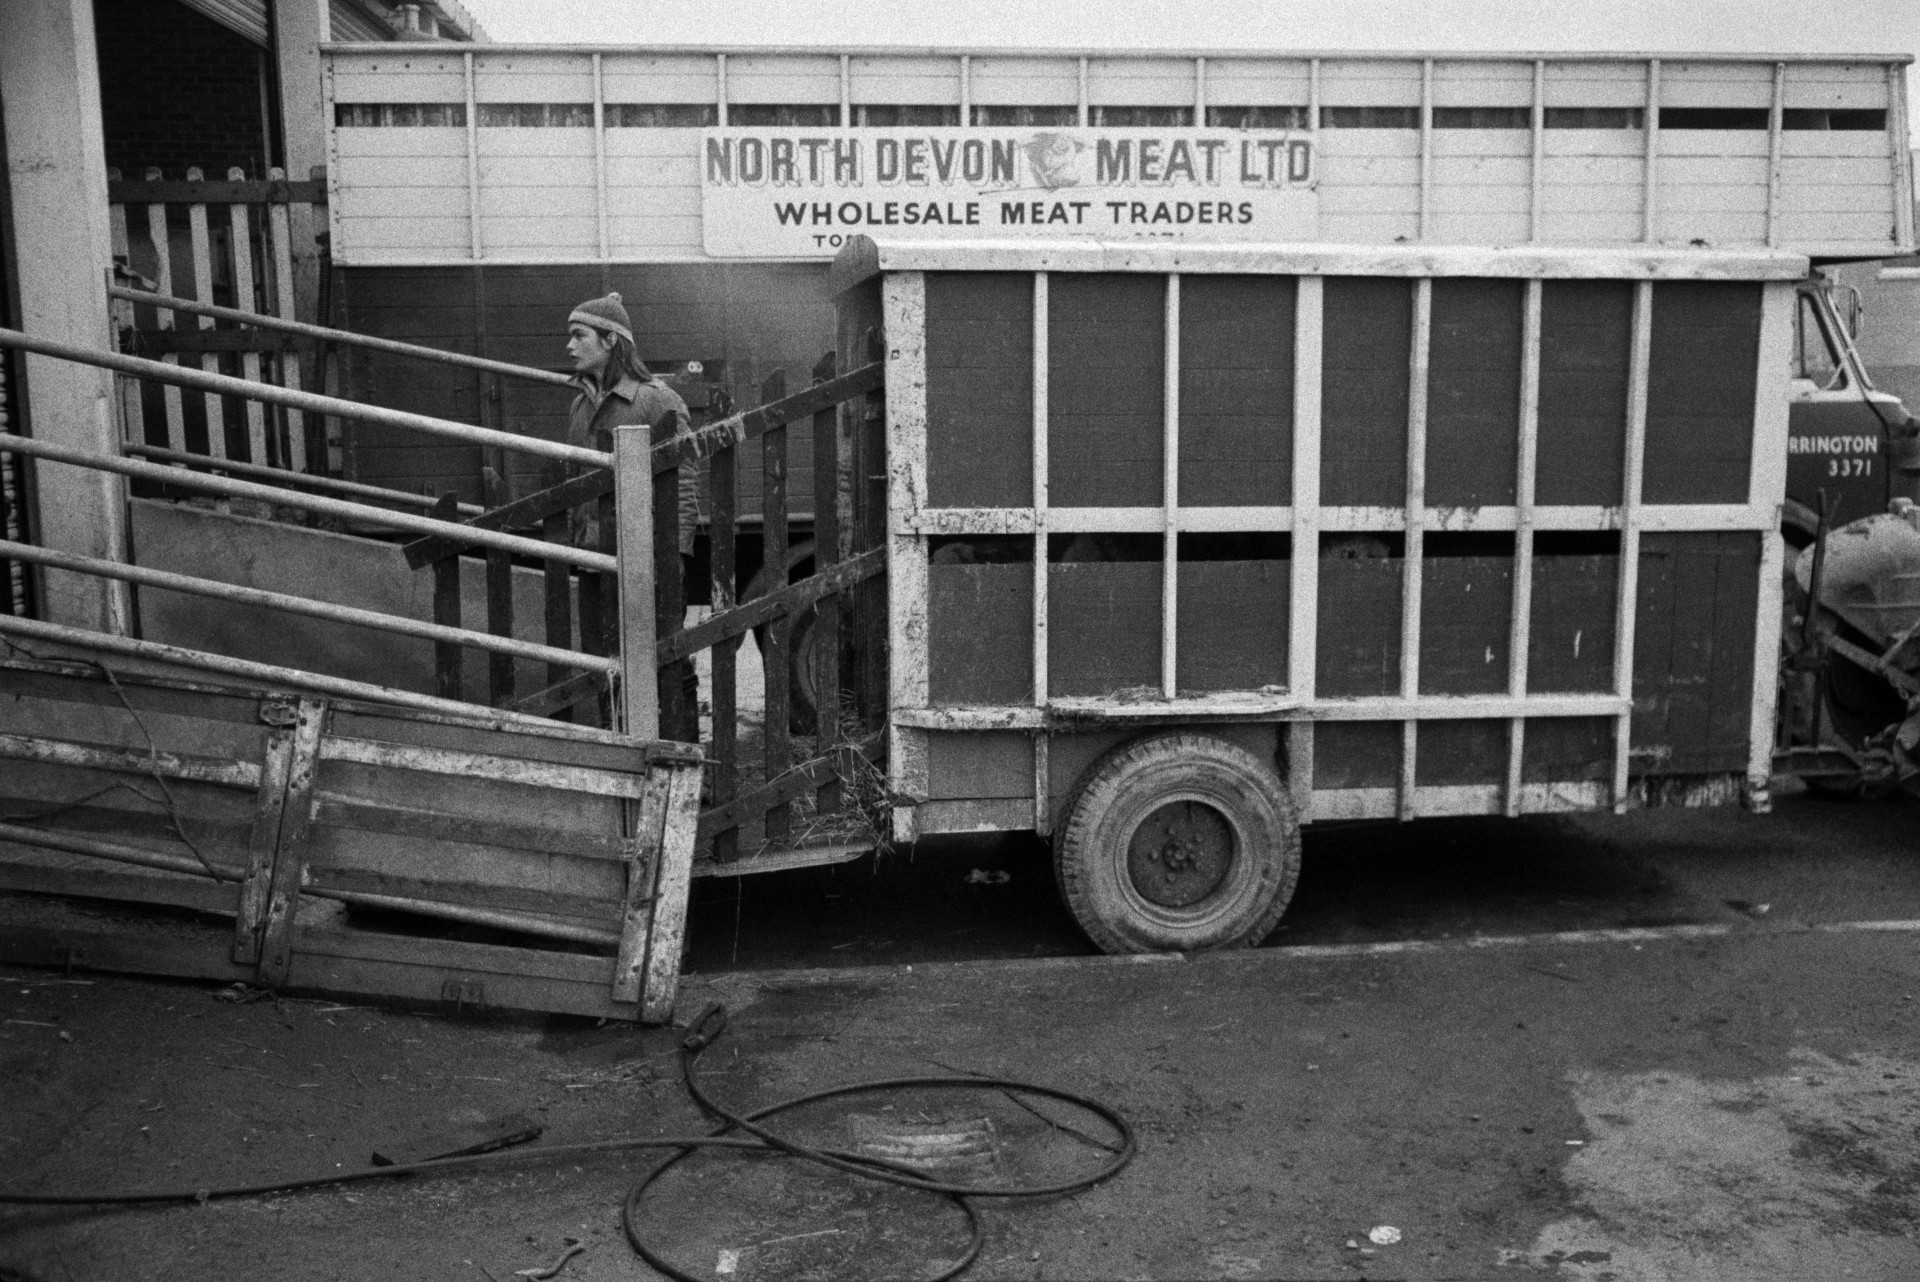 Derek Bright unloading a trailer with sheep to be slaughtered at the North Devon Meat Company in Torrington.